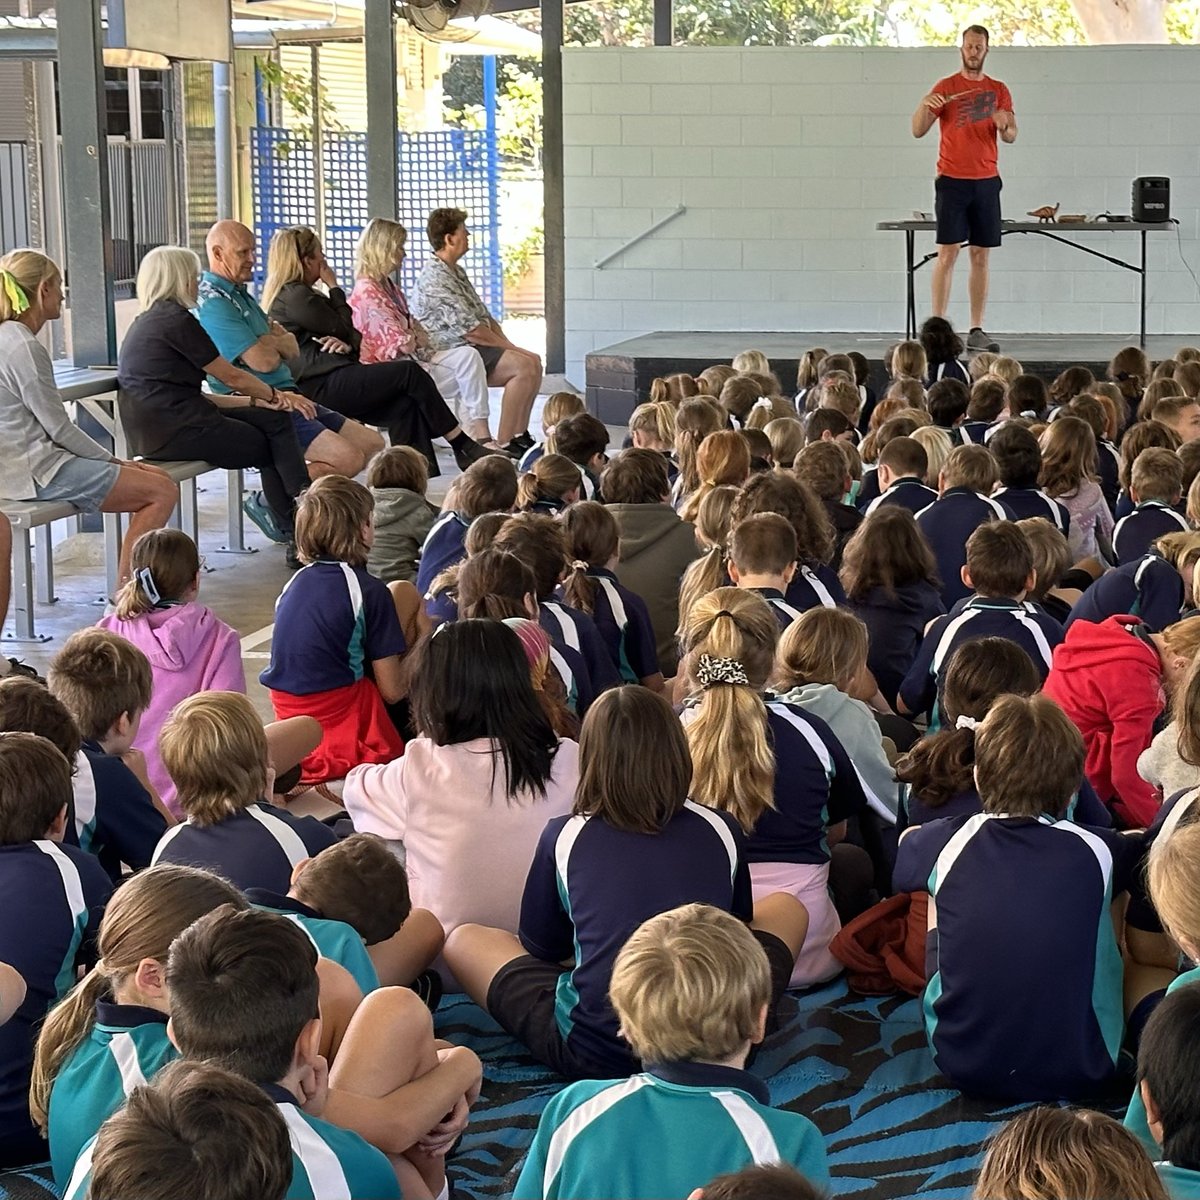 What a brilliant morning @e_m_knutsen of @MTQ_Townsville  & I had yesterday at Magnetic Island State School as part of the Palaeo Jam @Aus_ScienceWeek tour!

While there, we shared stories of Queensland's remarkable fossil heritage with the students and teachers.

#ScienceWeek